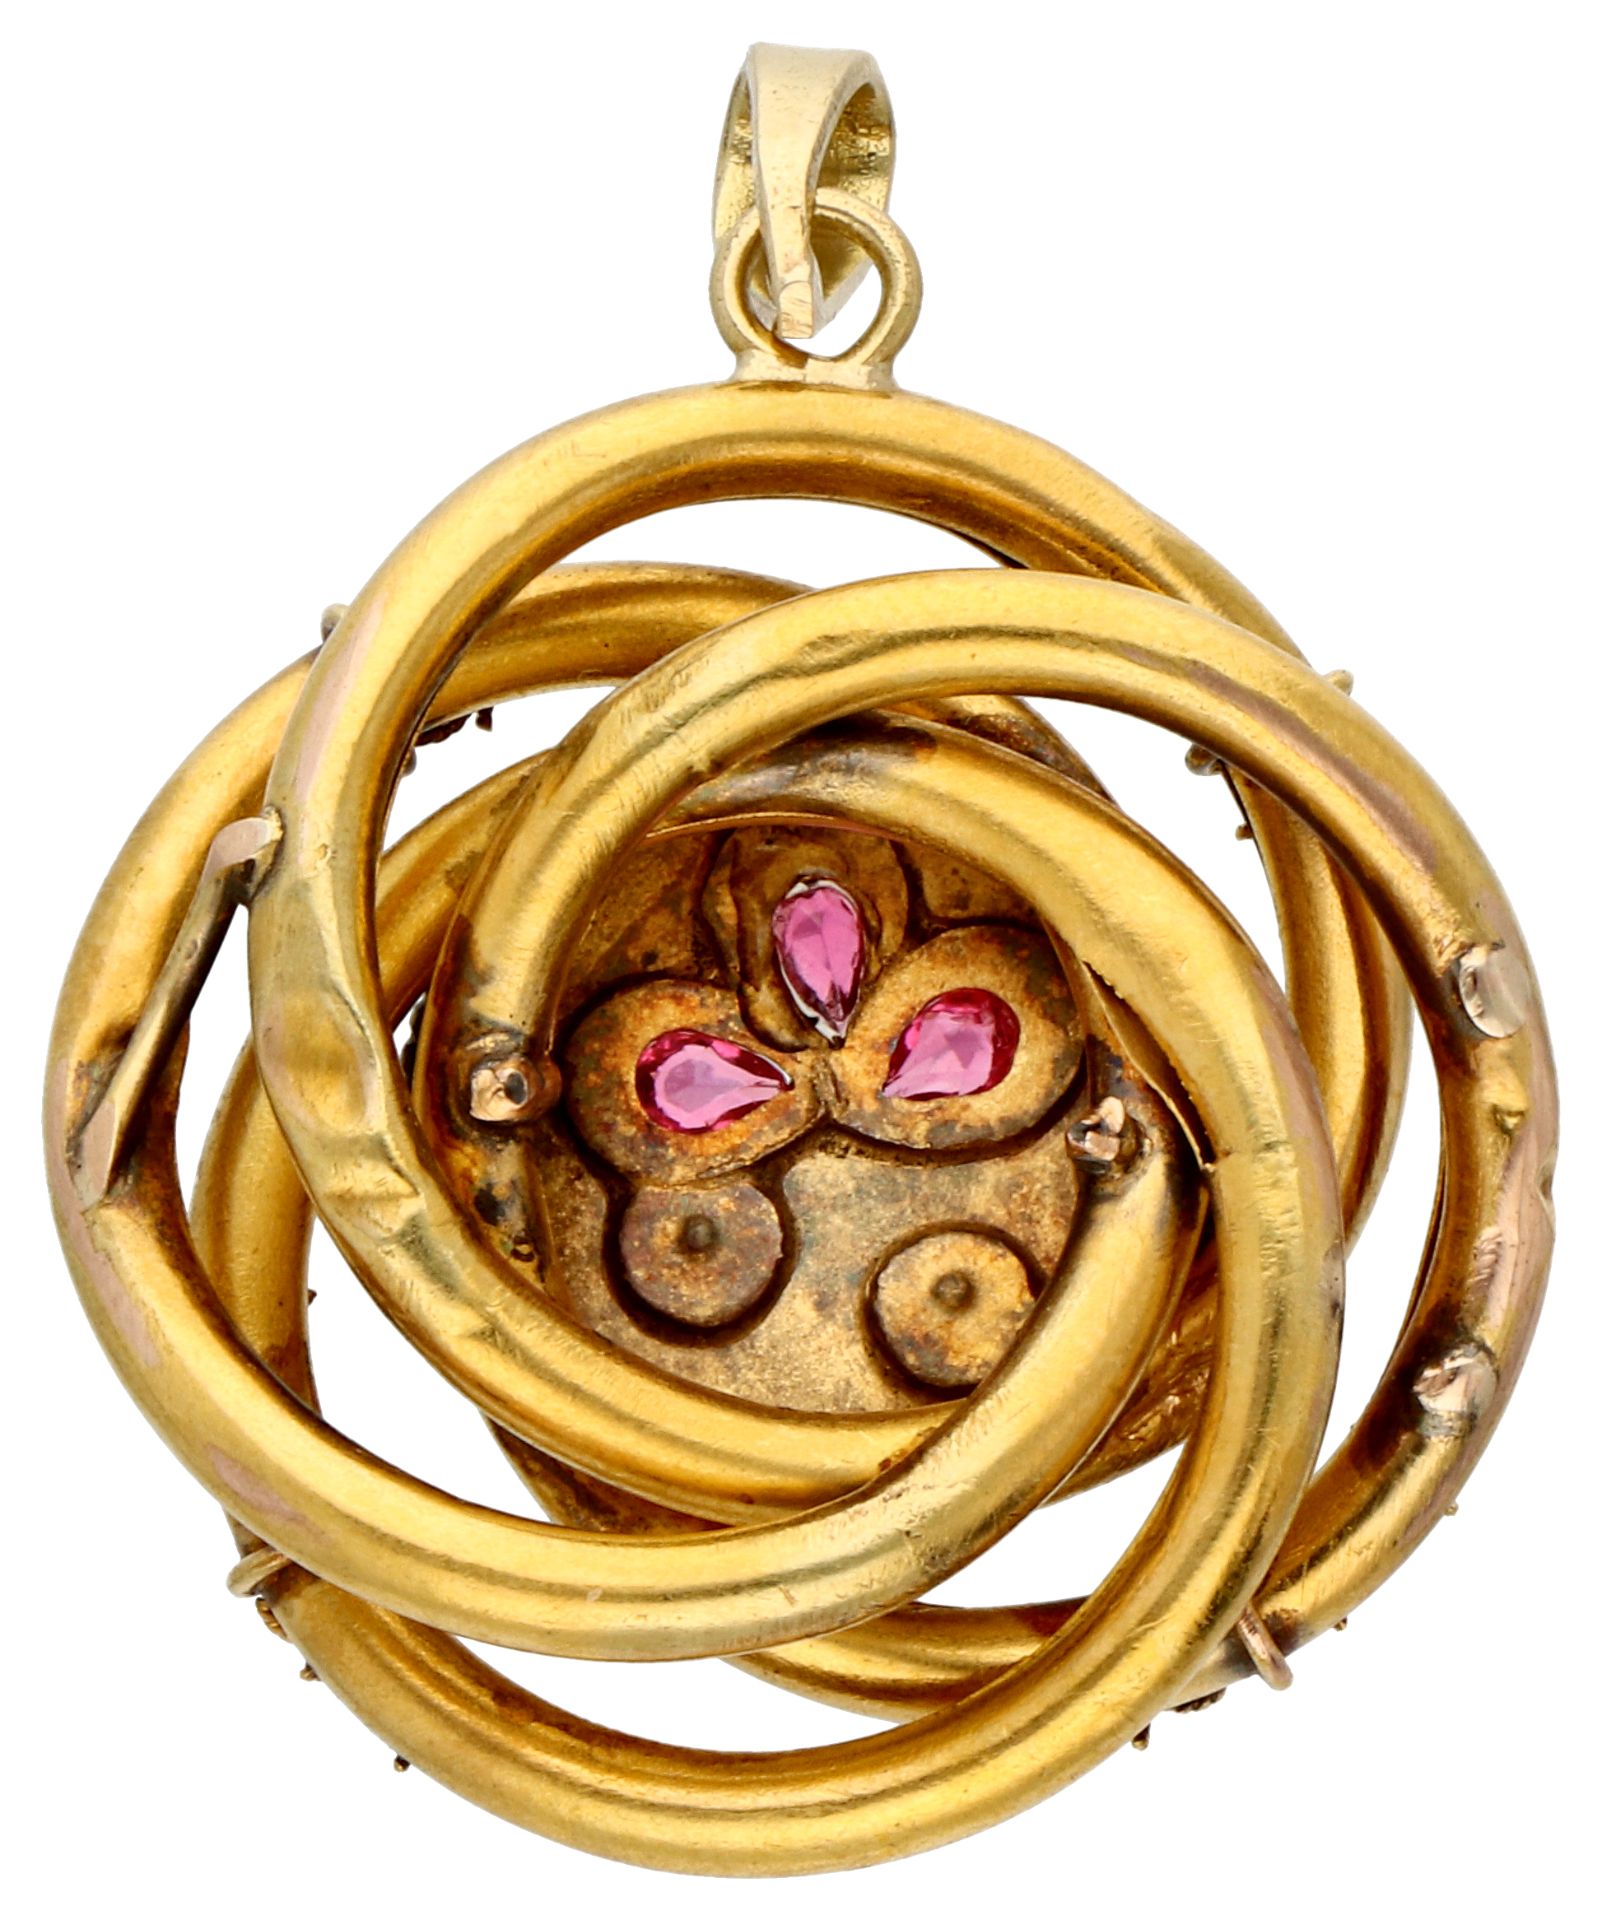 No Reserve - 14K Yellow gold antique pendant set with coloured stones and imitation seed pearls. - Image 2 of 2